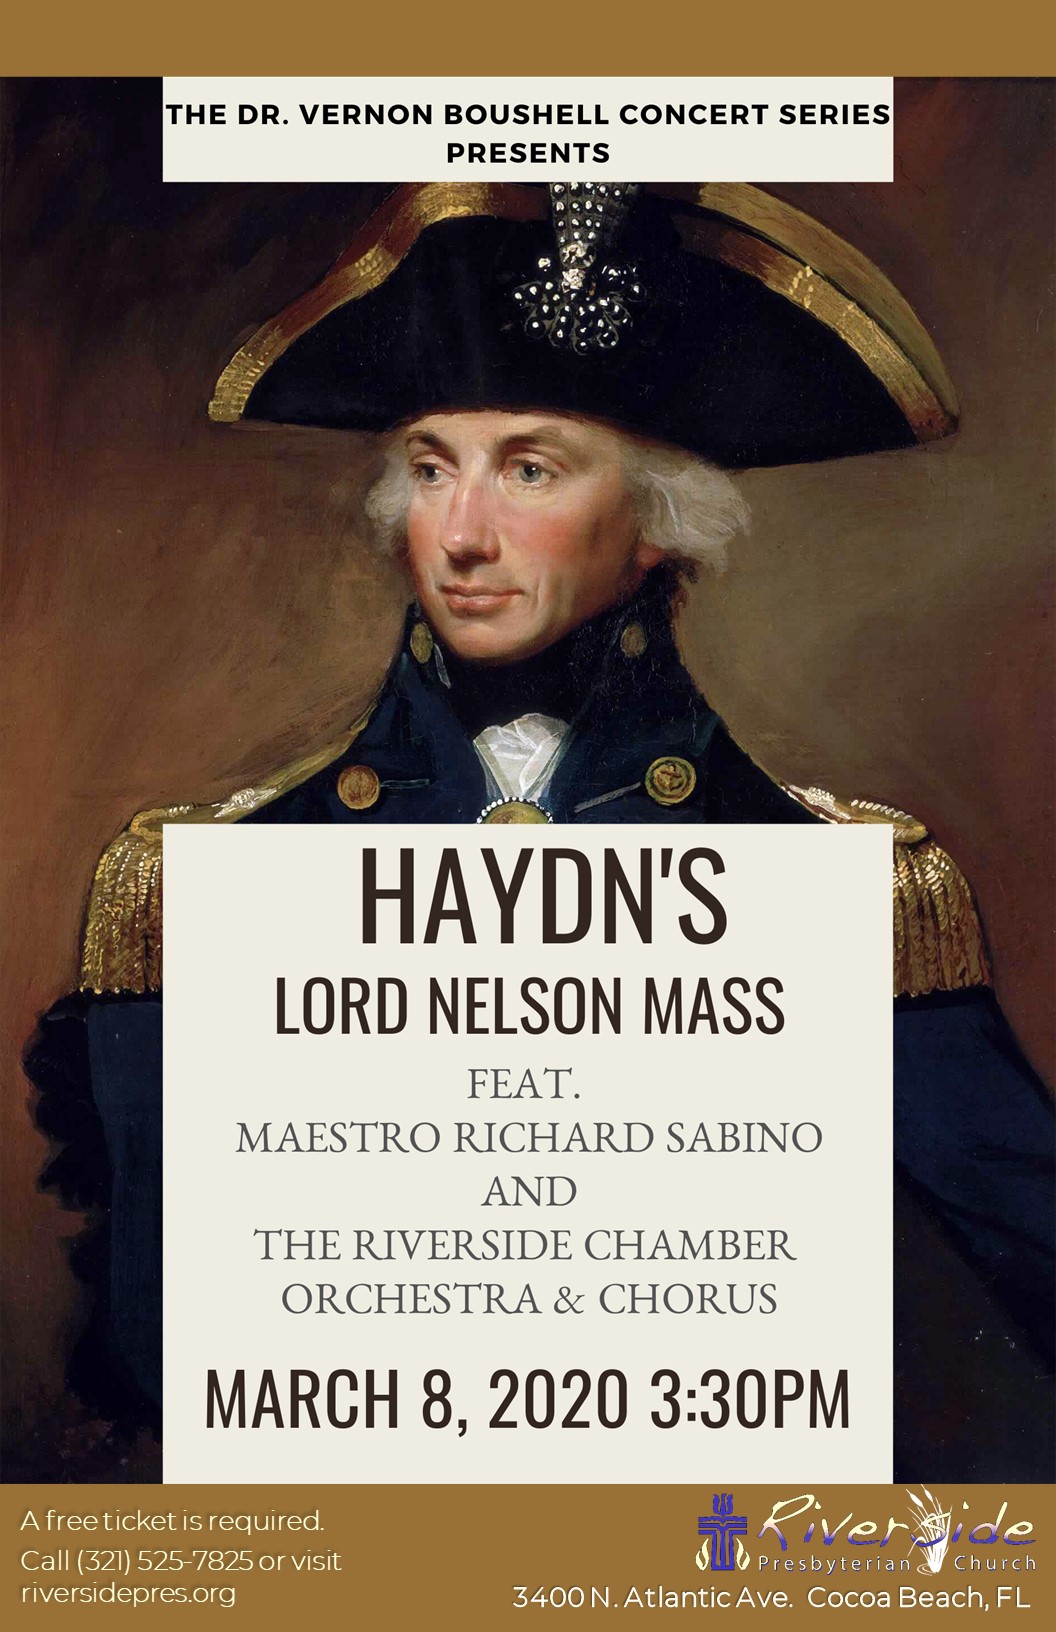 'Lord Nelson Mass' in Cocoa Beach presented by The Dr. Vernon Boushell Concert Series